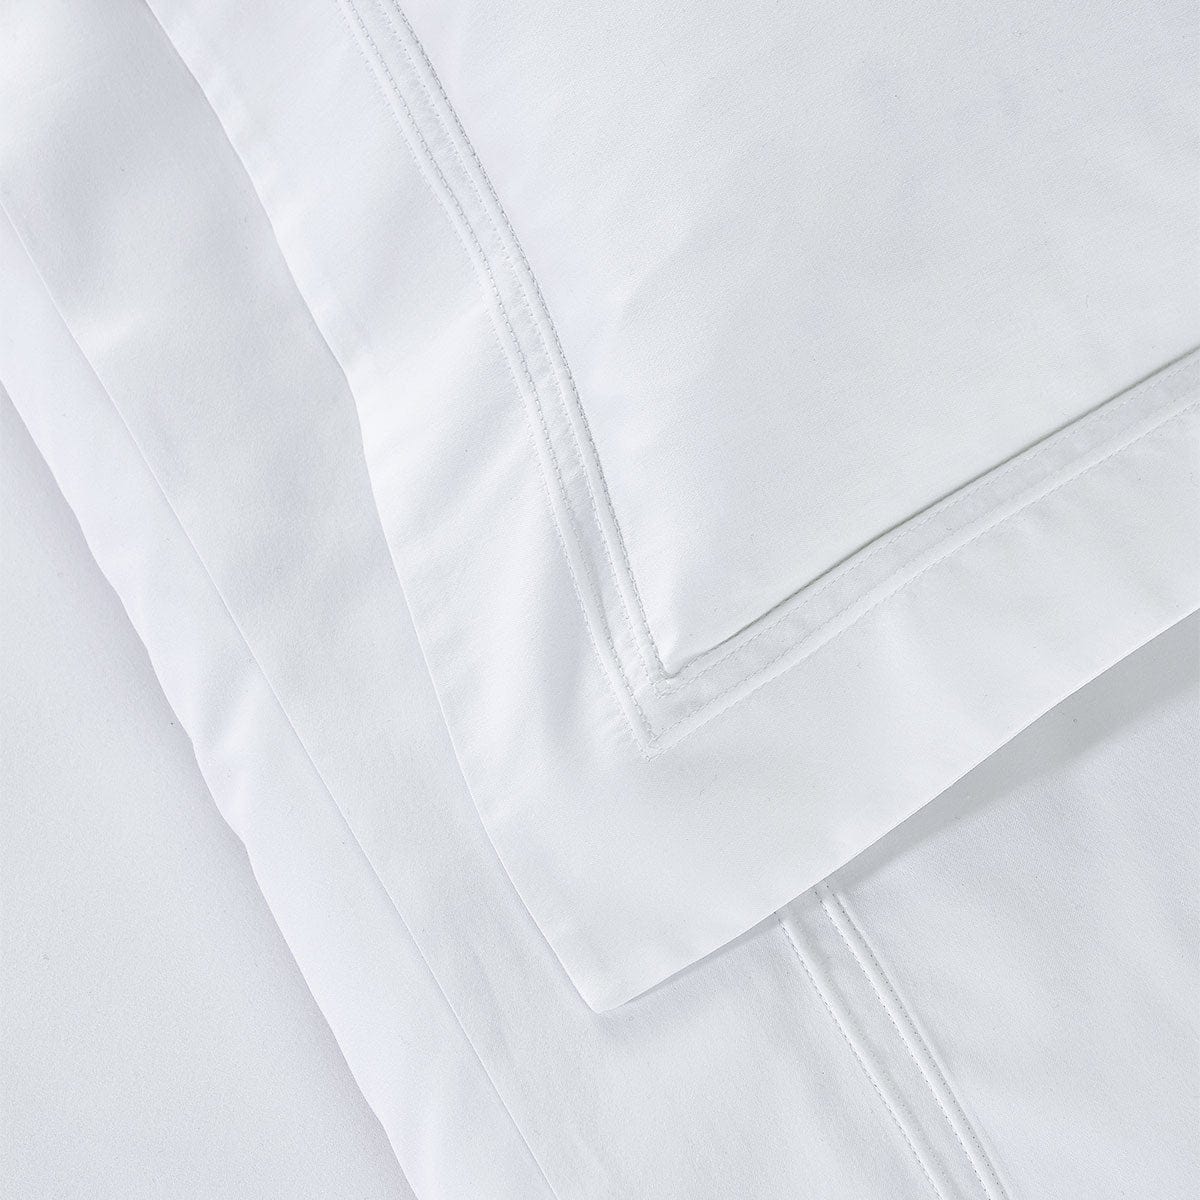 Duvet Covers Triomphe Duvet Cover by Yves Delorme Twin 68x86 / Blanc Yves Delorme